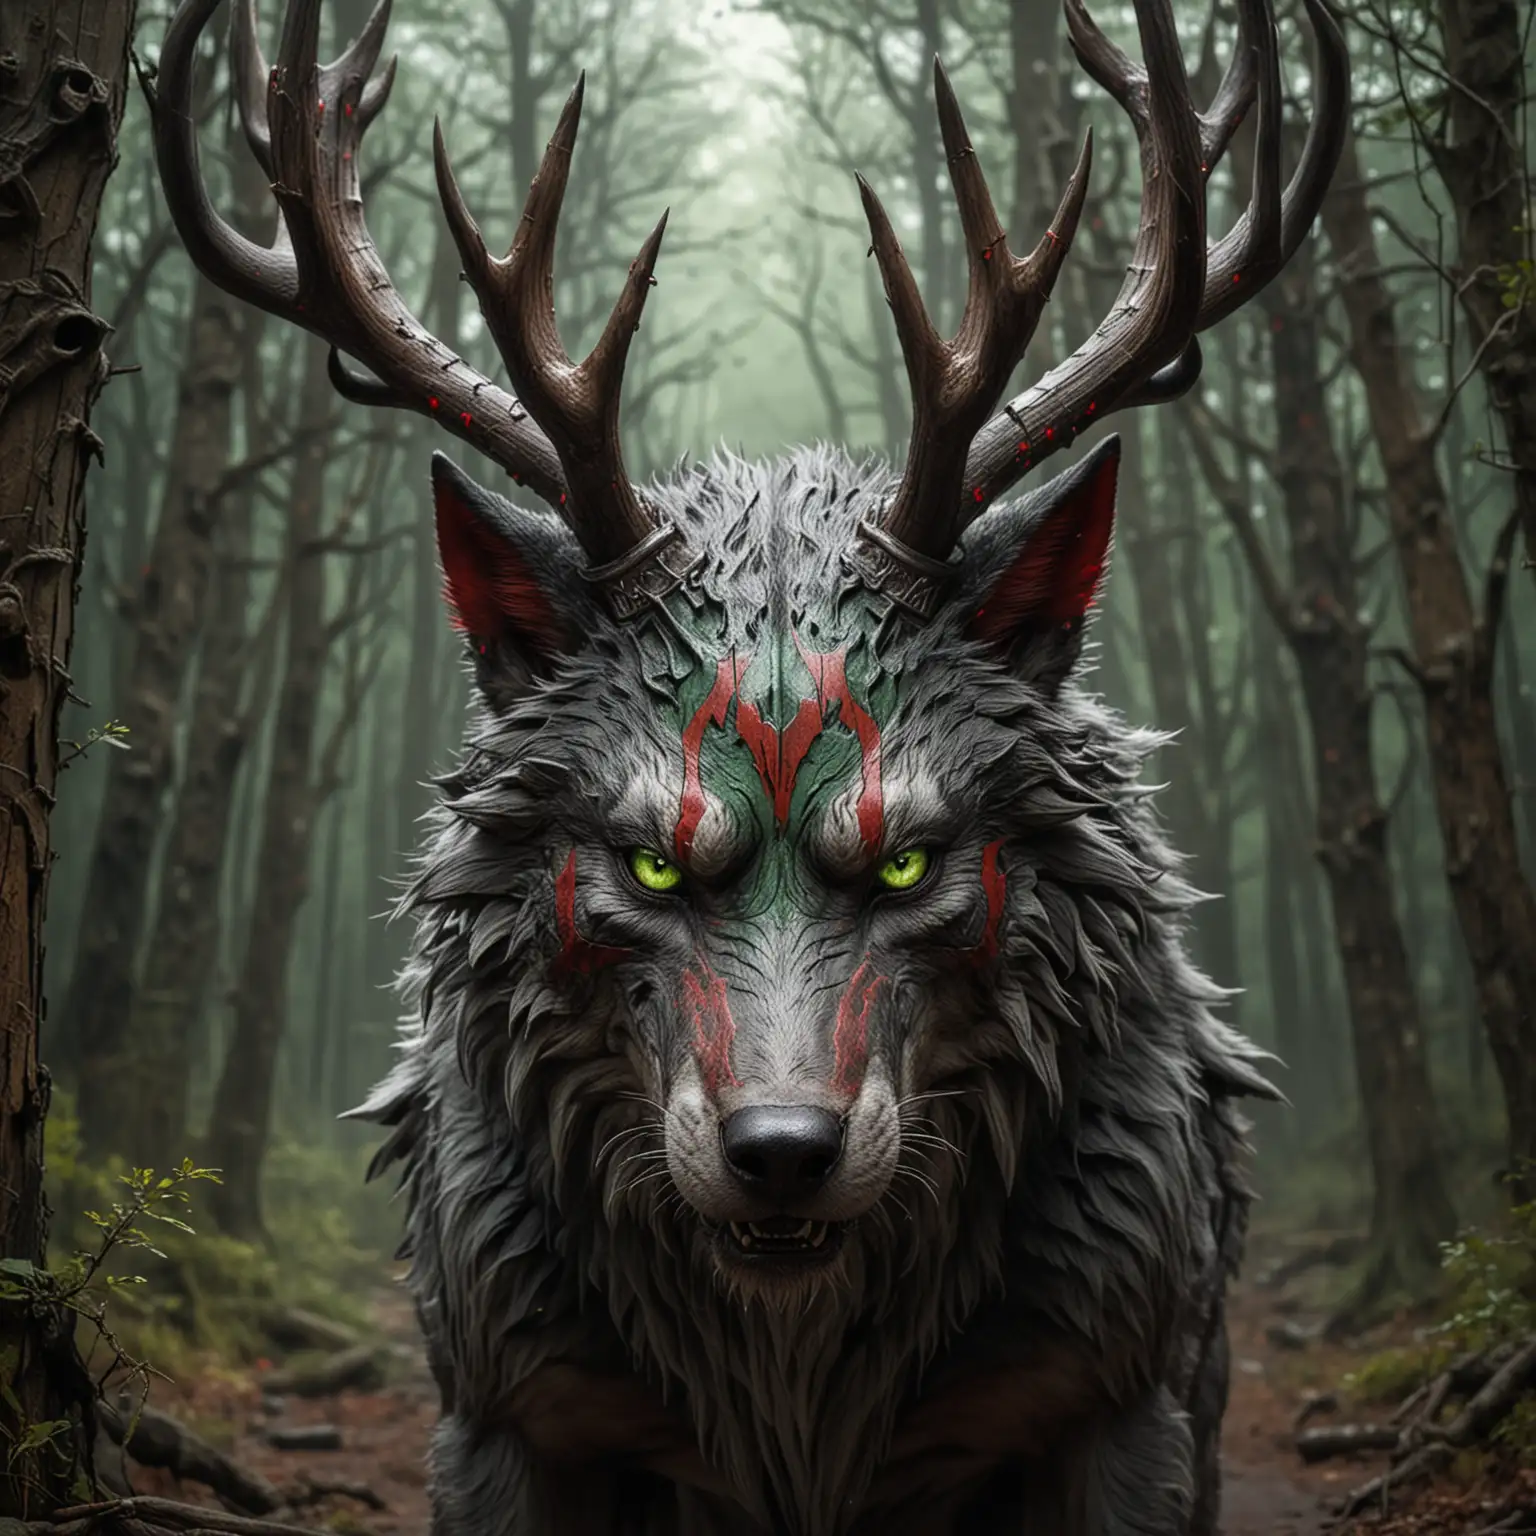 Majestic Direwolf with Antlers Enigmatic Guardian of the Dark Woods